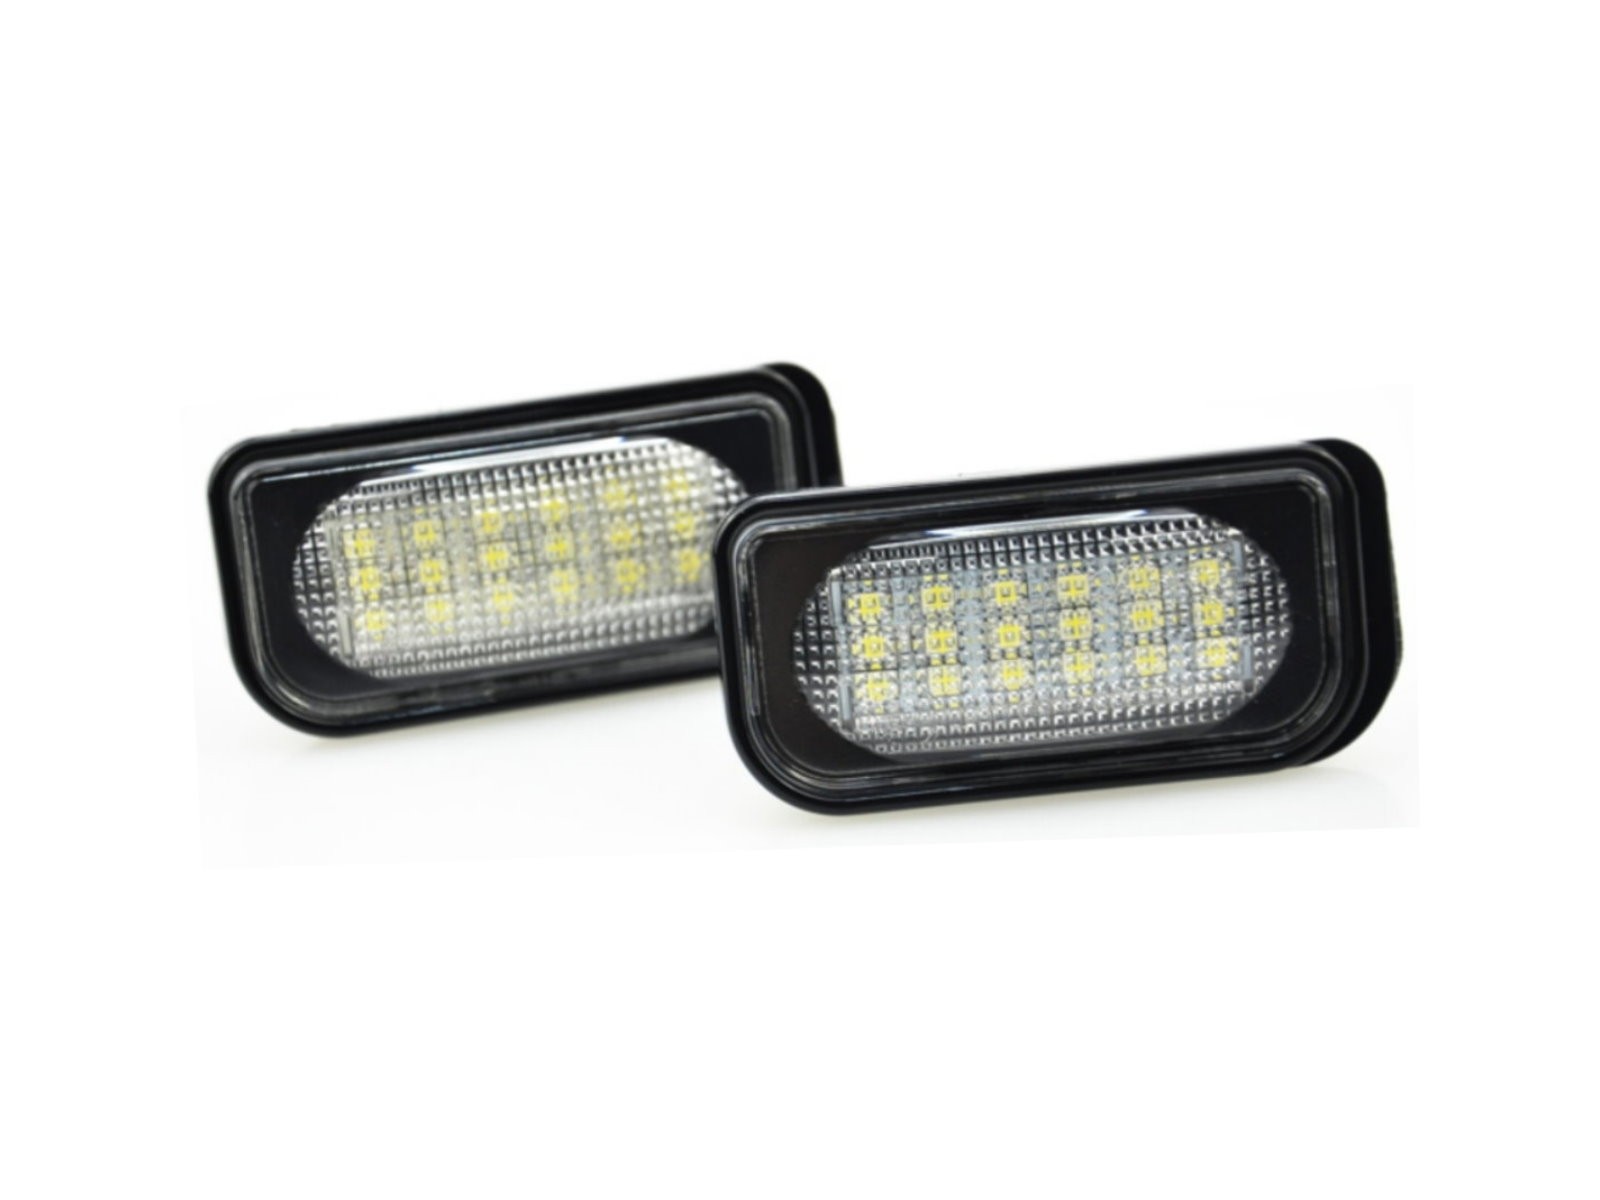 CrazyTheGod CLK-CLASS A209 Second generation 2003-2010 Convertible 2D LED License Lamp White for Mercedes-Benz